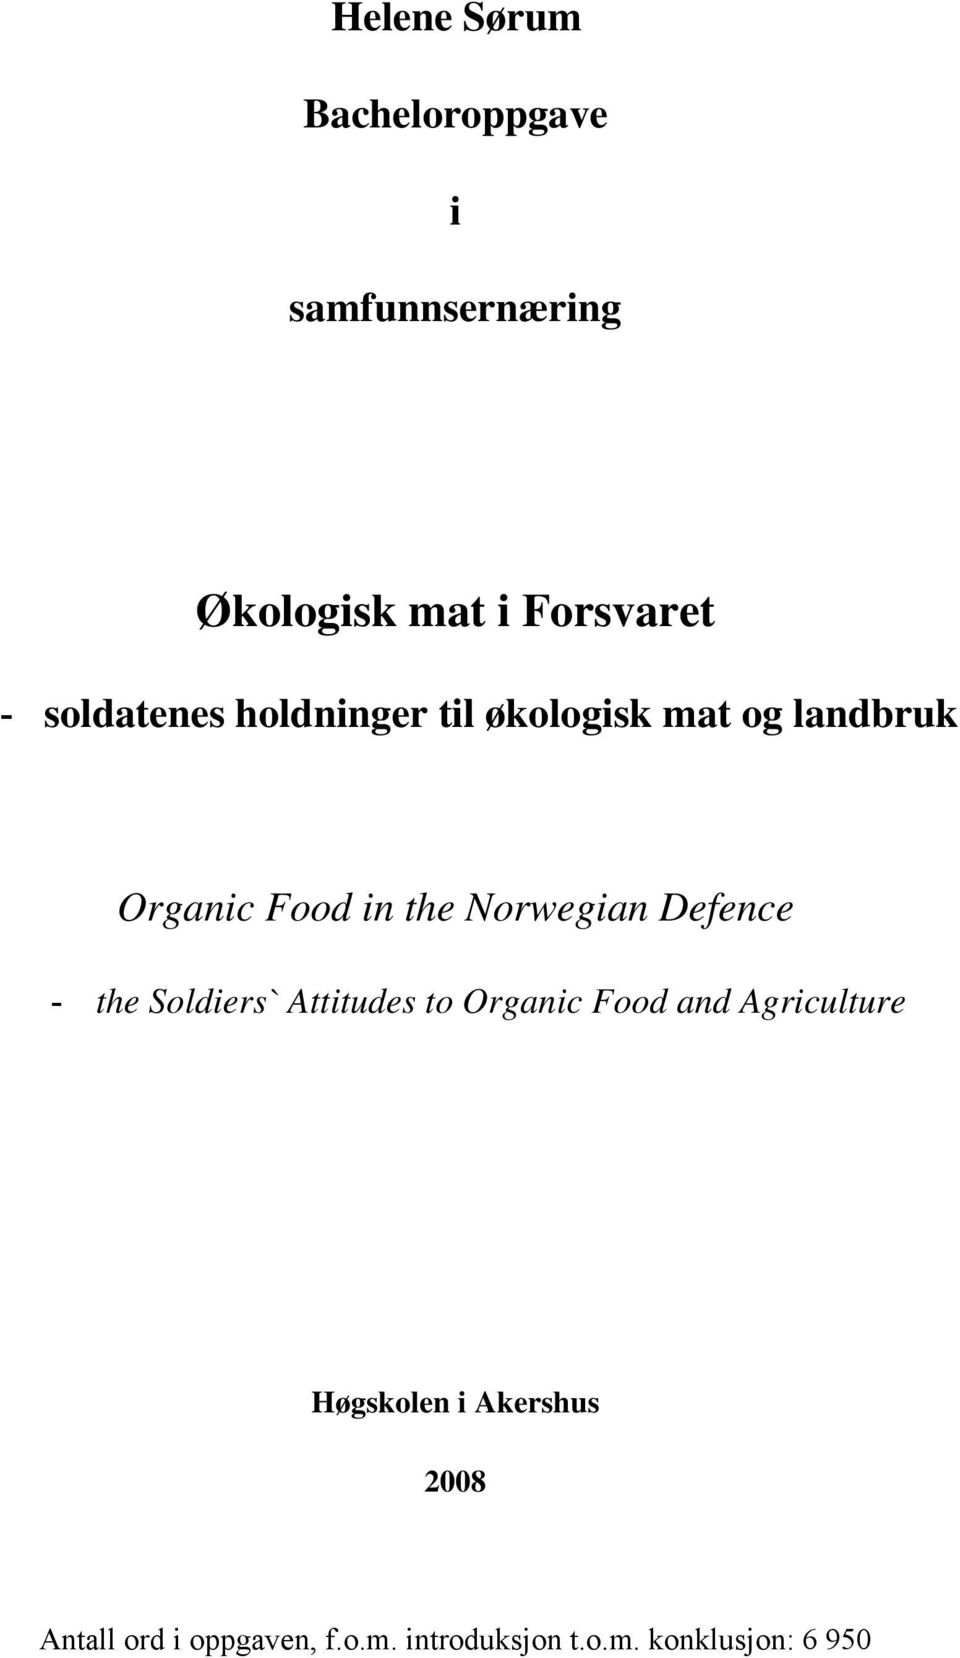 Norwegian Defence - the Soldiers` Attitudes to Organic Food and Agriculture